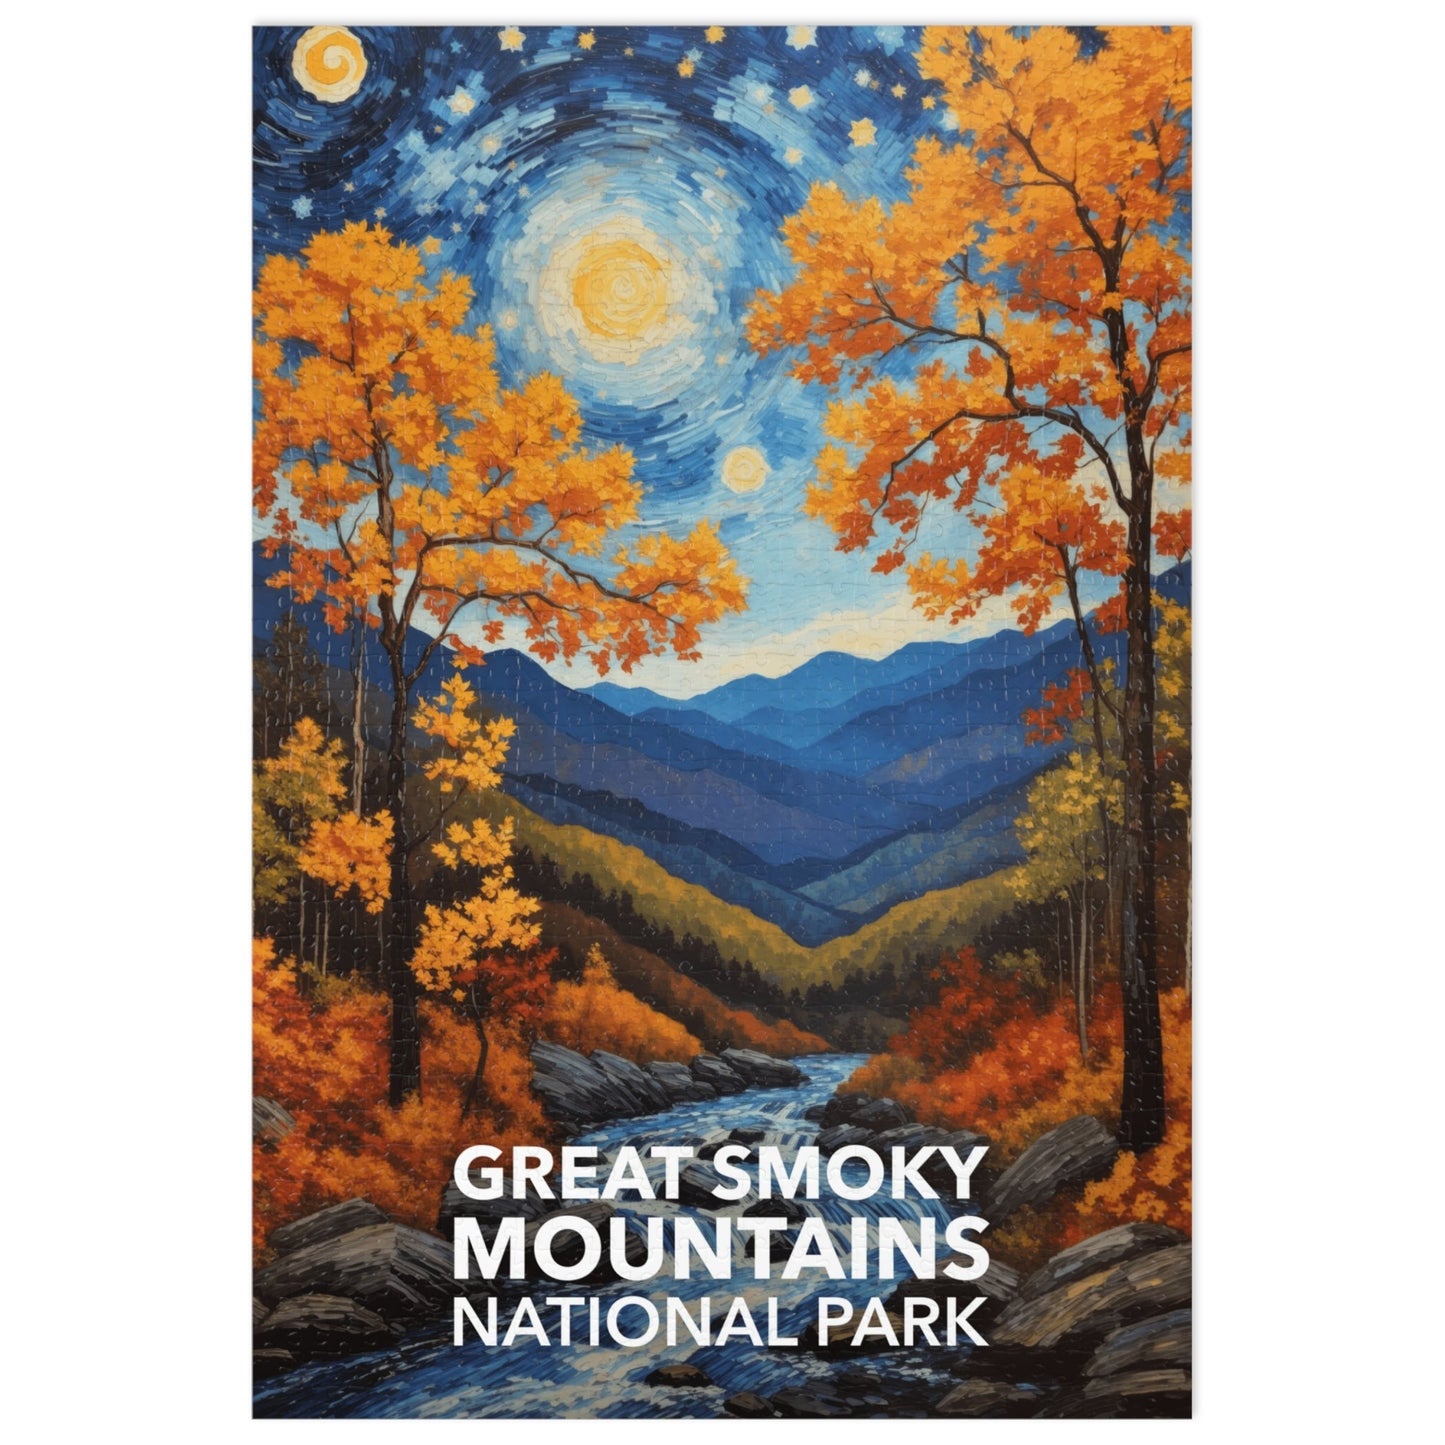 Great Smoky Mountains National Park Jigsaw Puzzle